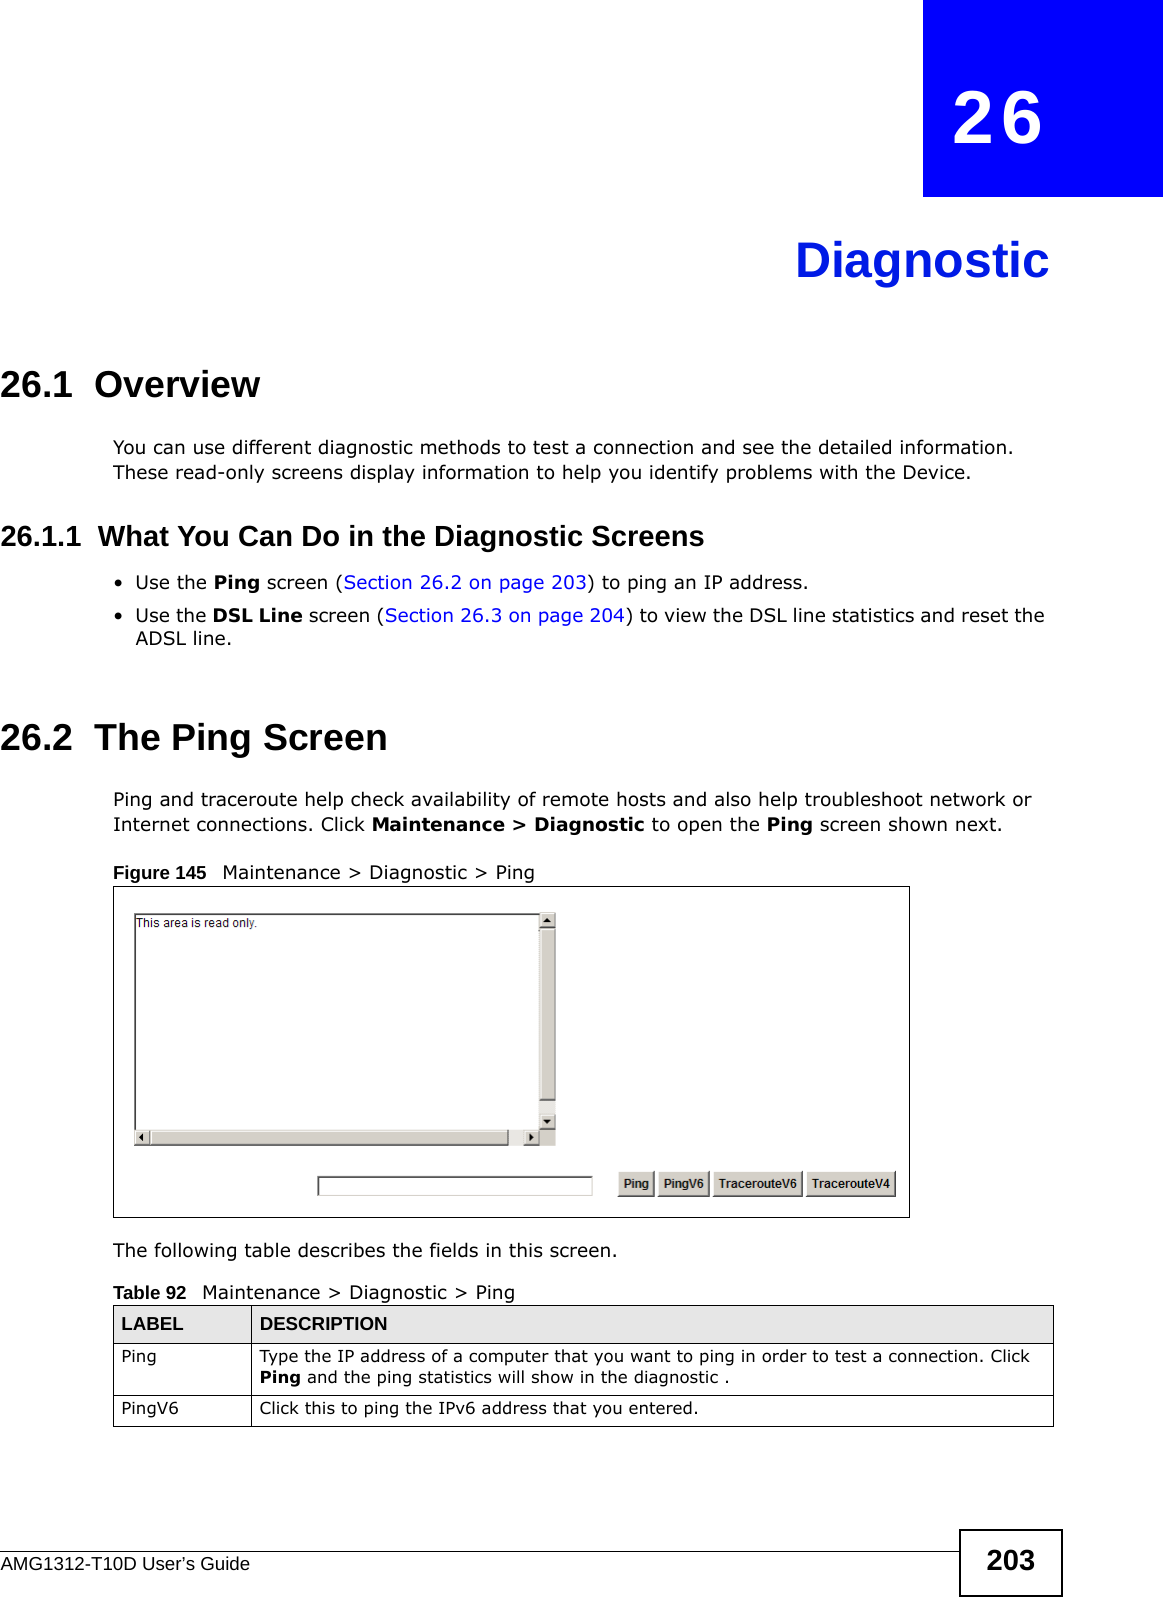 AMG1312-T10D User’s Guide 203CHAPTER   26Diagnostic26.1  OverviewYou can use different diagnostic methods to test a connection and see the detailed information. These read-only screens display information to help you identify problems with the Device.26.1.1  What You Can Do in the Diagnostic Screens•Use the Ping screen (Section 26.2 on page 203) to ping an IP address.•Use the DSL Line screen (Section 26.3 on page 204) to view the DSL line statistics and reset the ADSL line.26.2  The Ping Screen Ping and traceroute help check availability of remote hosts and also help troubleshoot network or Internet connections. Click Maintenance &gt; Diagnostic to open the Ping screen shown next.Figure 145   Maintenance &gt; Diagnostic &gt; Ping The following table describes the fields in this screen. Table 92   Maintenance &gt; Diagnostic &gt; PingLABEL DESCRIPTIONPing Type the IP address of a computer that you want to ping in order to test a connection. Click Ping and the ping statistics will show in the diagnostic .PingV6 Click this to ping the IPv6 address that you entered.